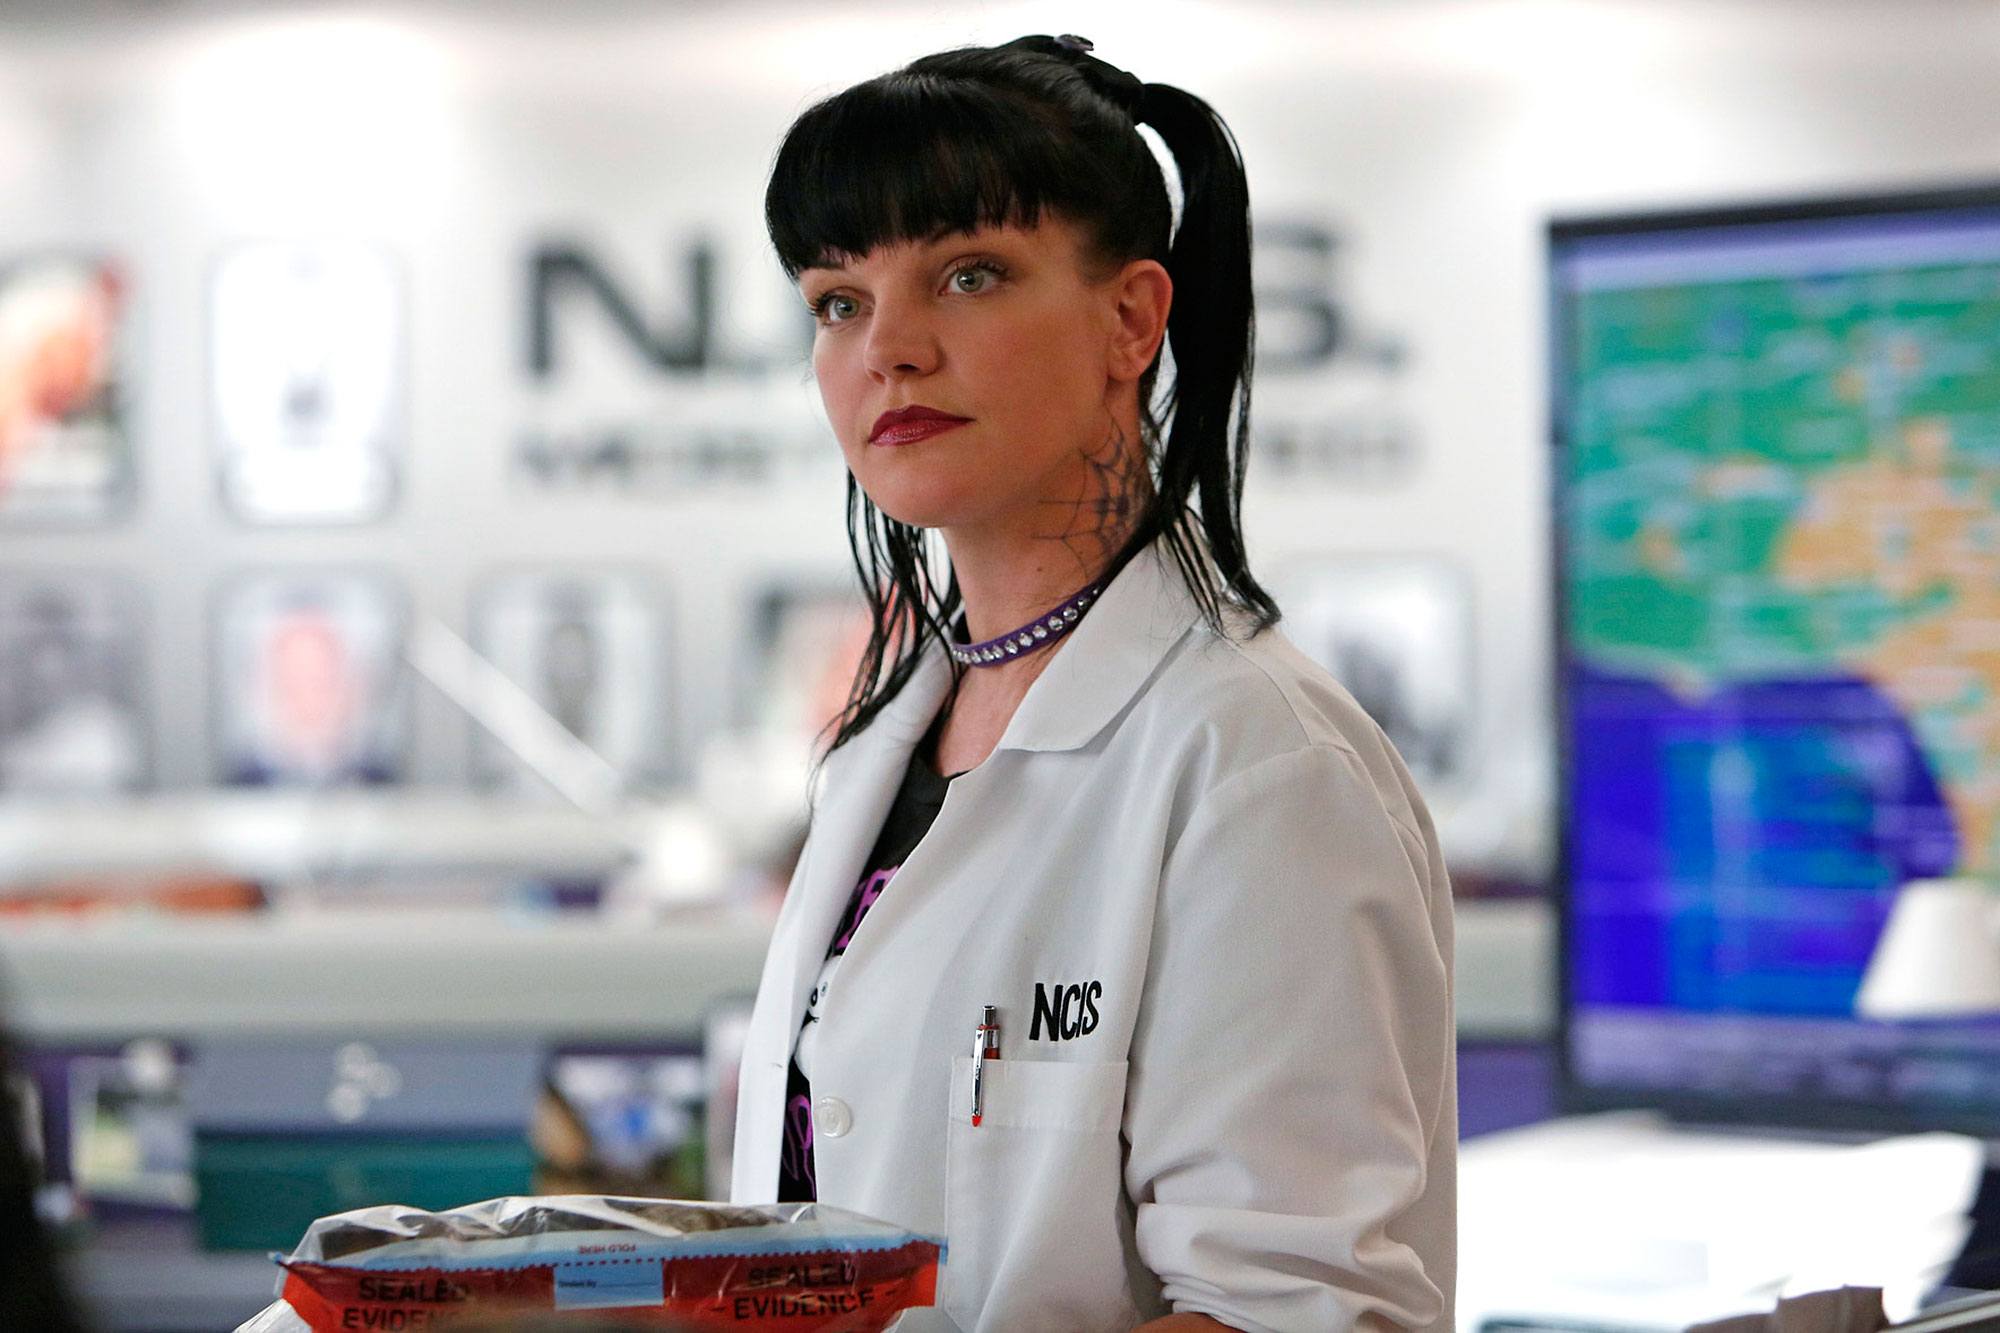 LOS ANGELES - AUGUST 14: "Under the Radar" -- The NCIS team must rely on Twitter for a case involving a missing Navy Lieutenant, on NCIS, Tuesday, Oct. 8 (8:00-9:00 PM, ET/PT) on the CBS Television Network. Pictured: Pauley Perrette. (Photo by Cliff Lipson/CBS via Getty Images)